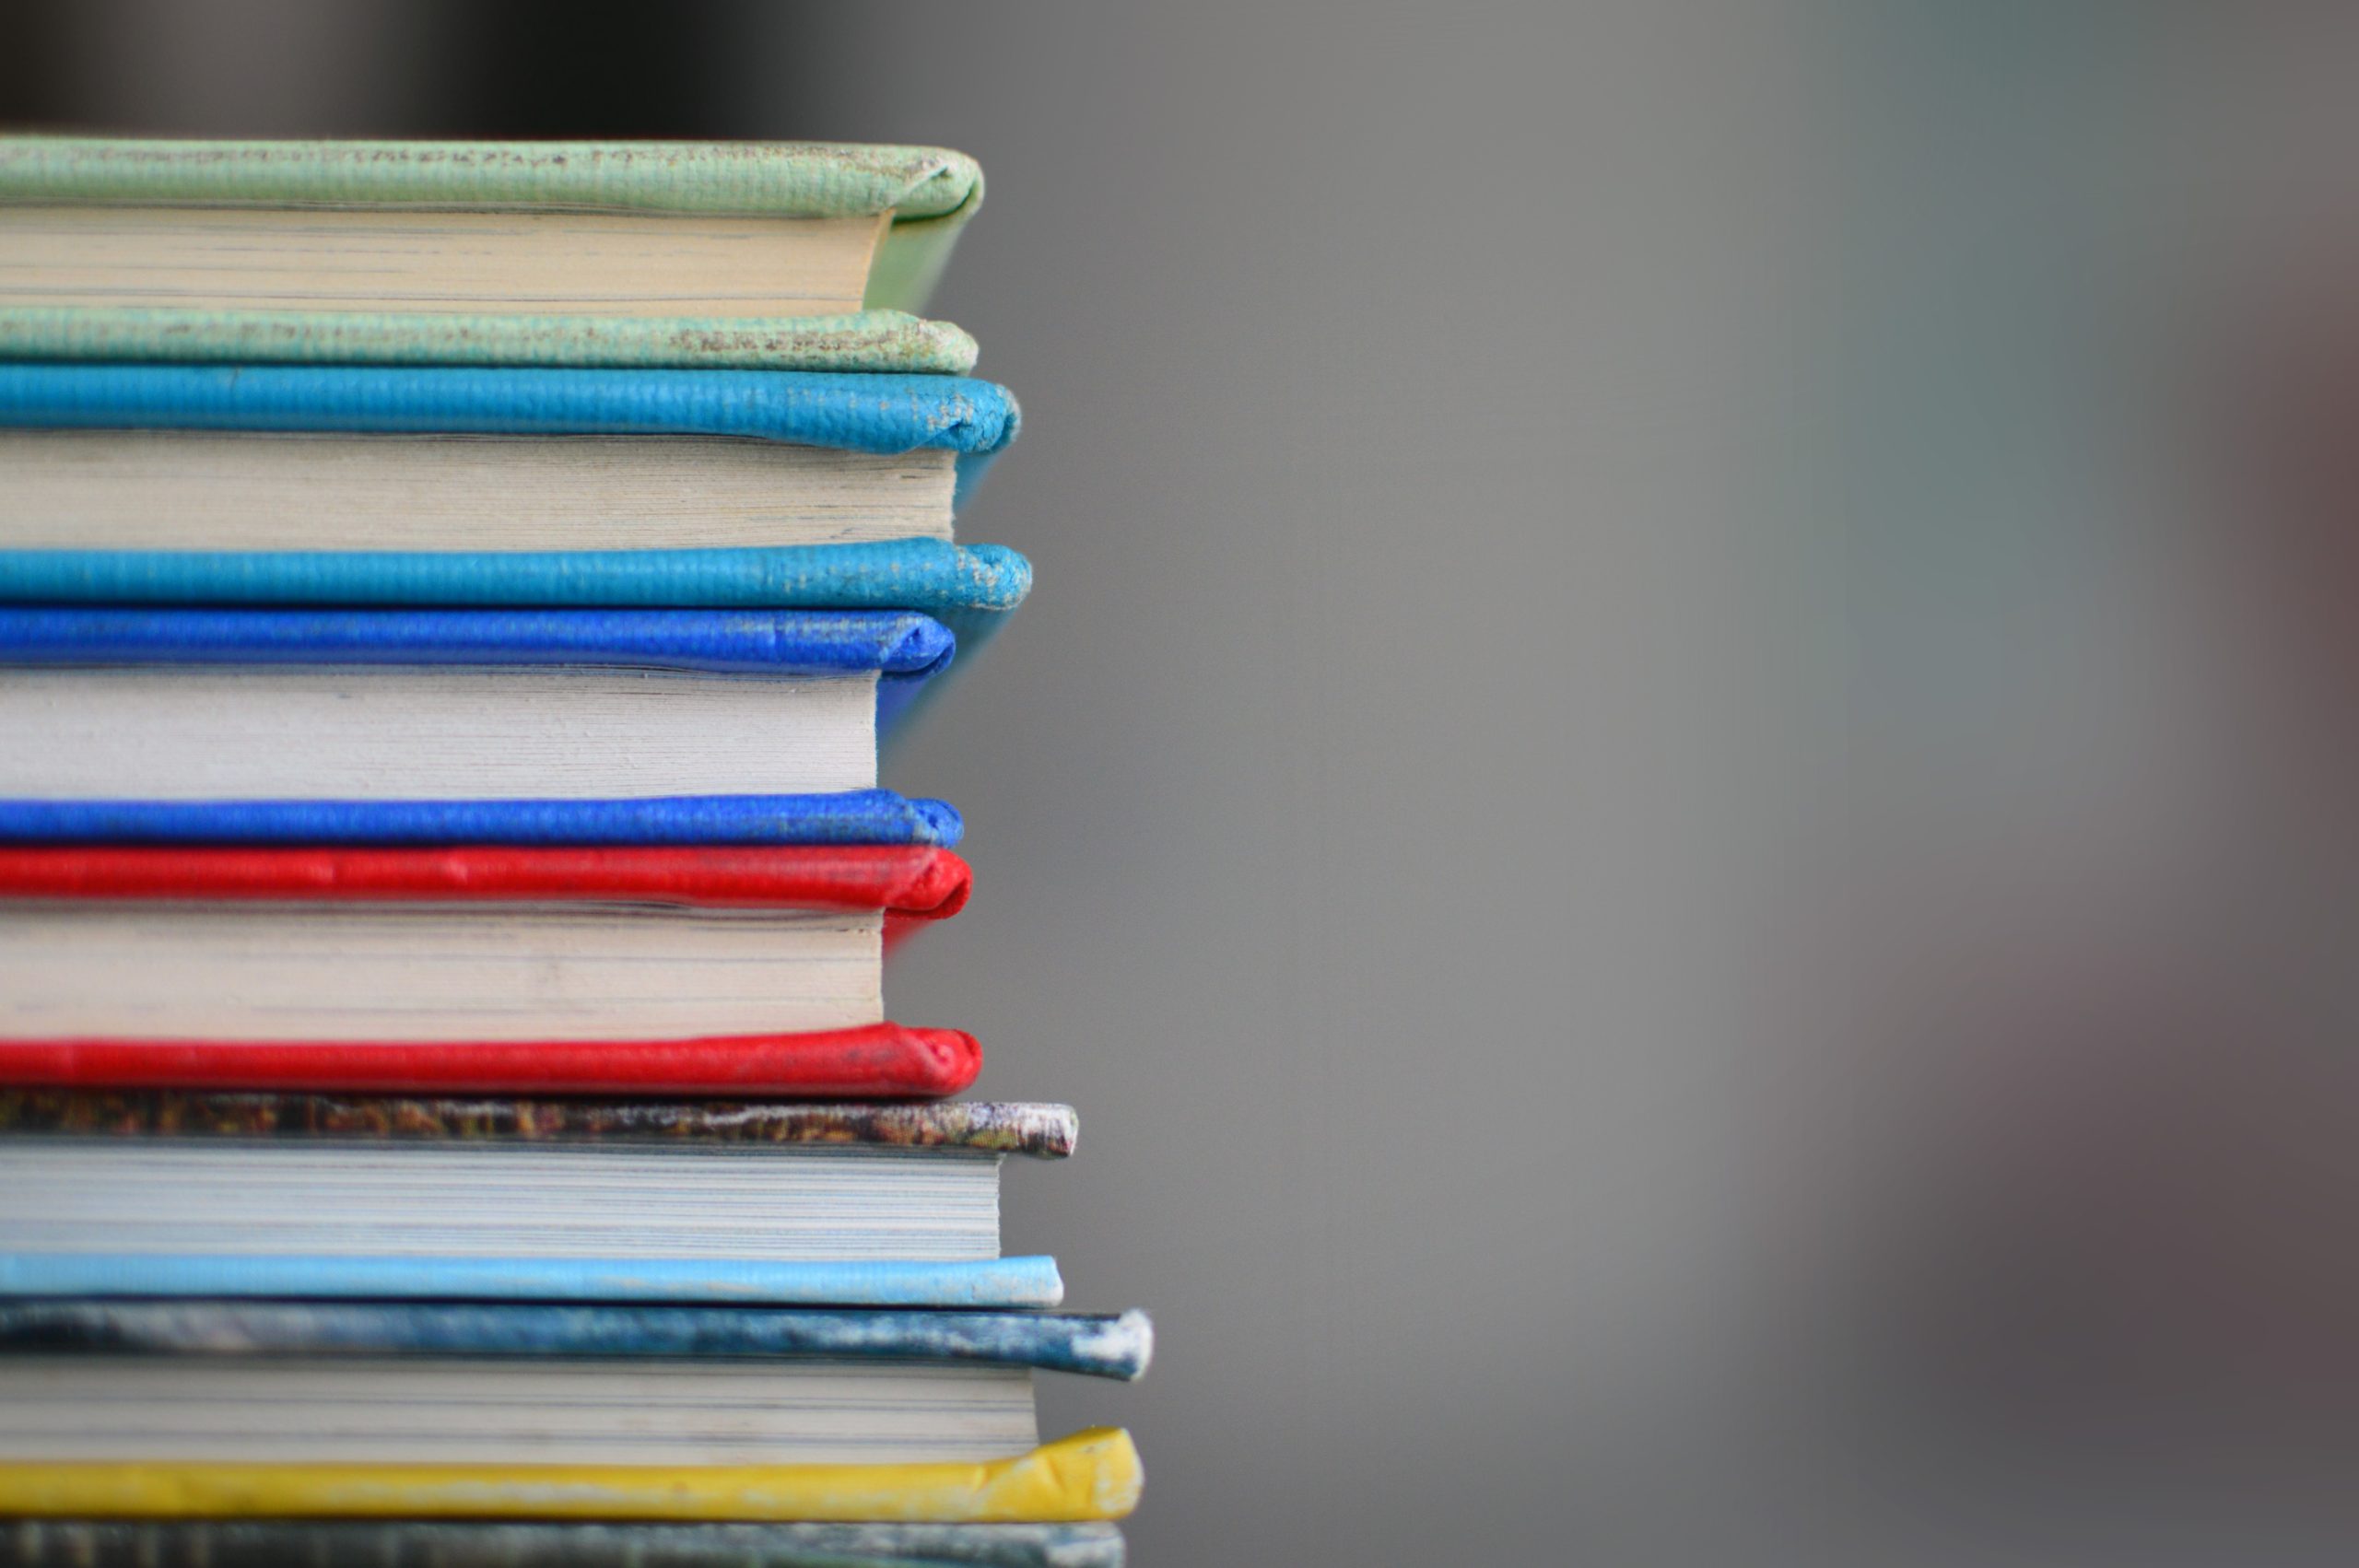 A stack of various colors of books to the left of the image with a blurry, unidentifiable right side